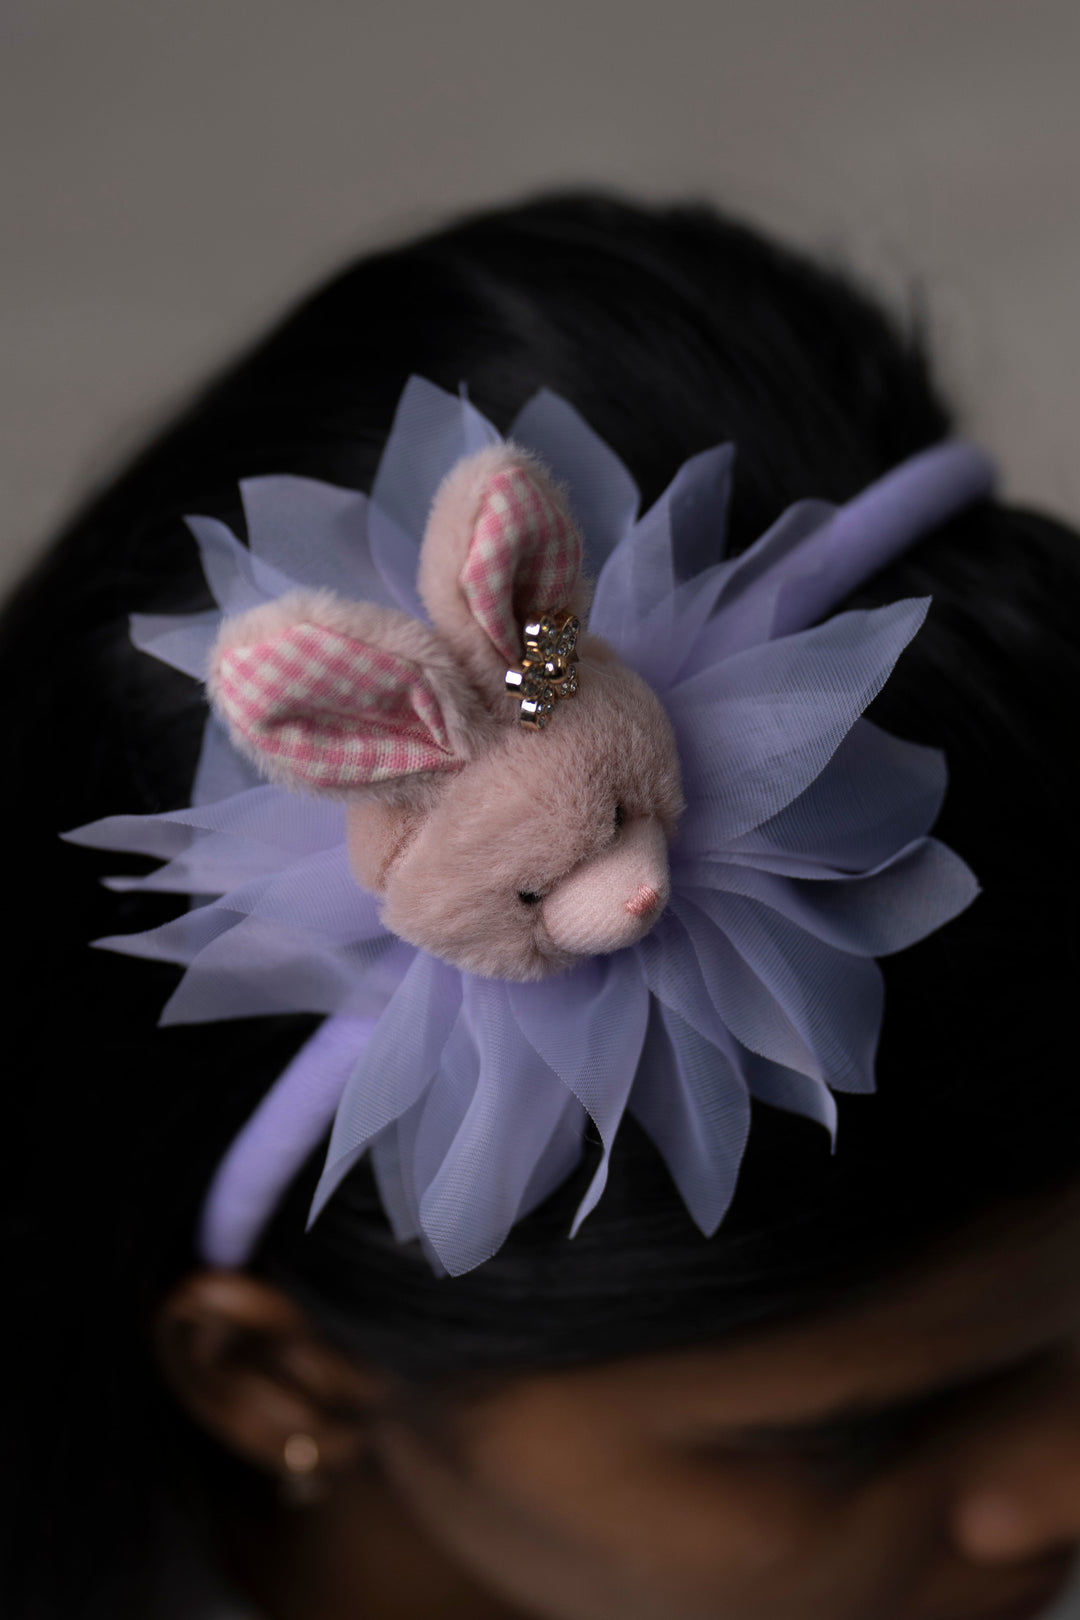 The Nesavu Hair Band Charming Lavender Bunny Hairbow with Tulle and Crystal Detail Nesavu Purple JHB80B Lavender Bunny Bow with Tulle and Crystals | Whimsical Hair Accessory for Children | The Nesavu